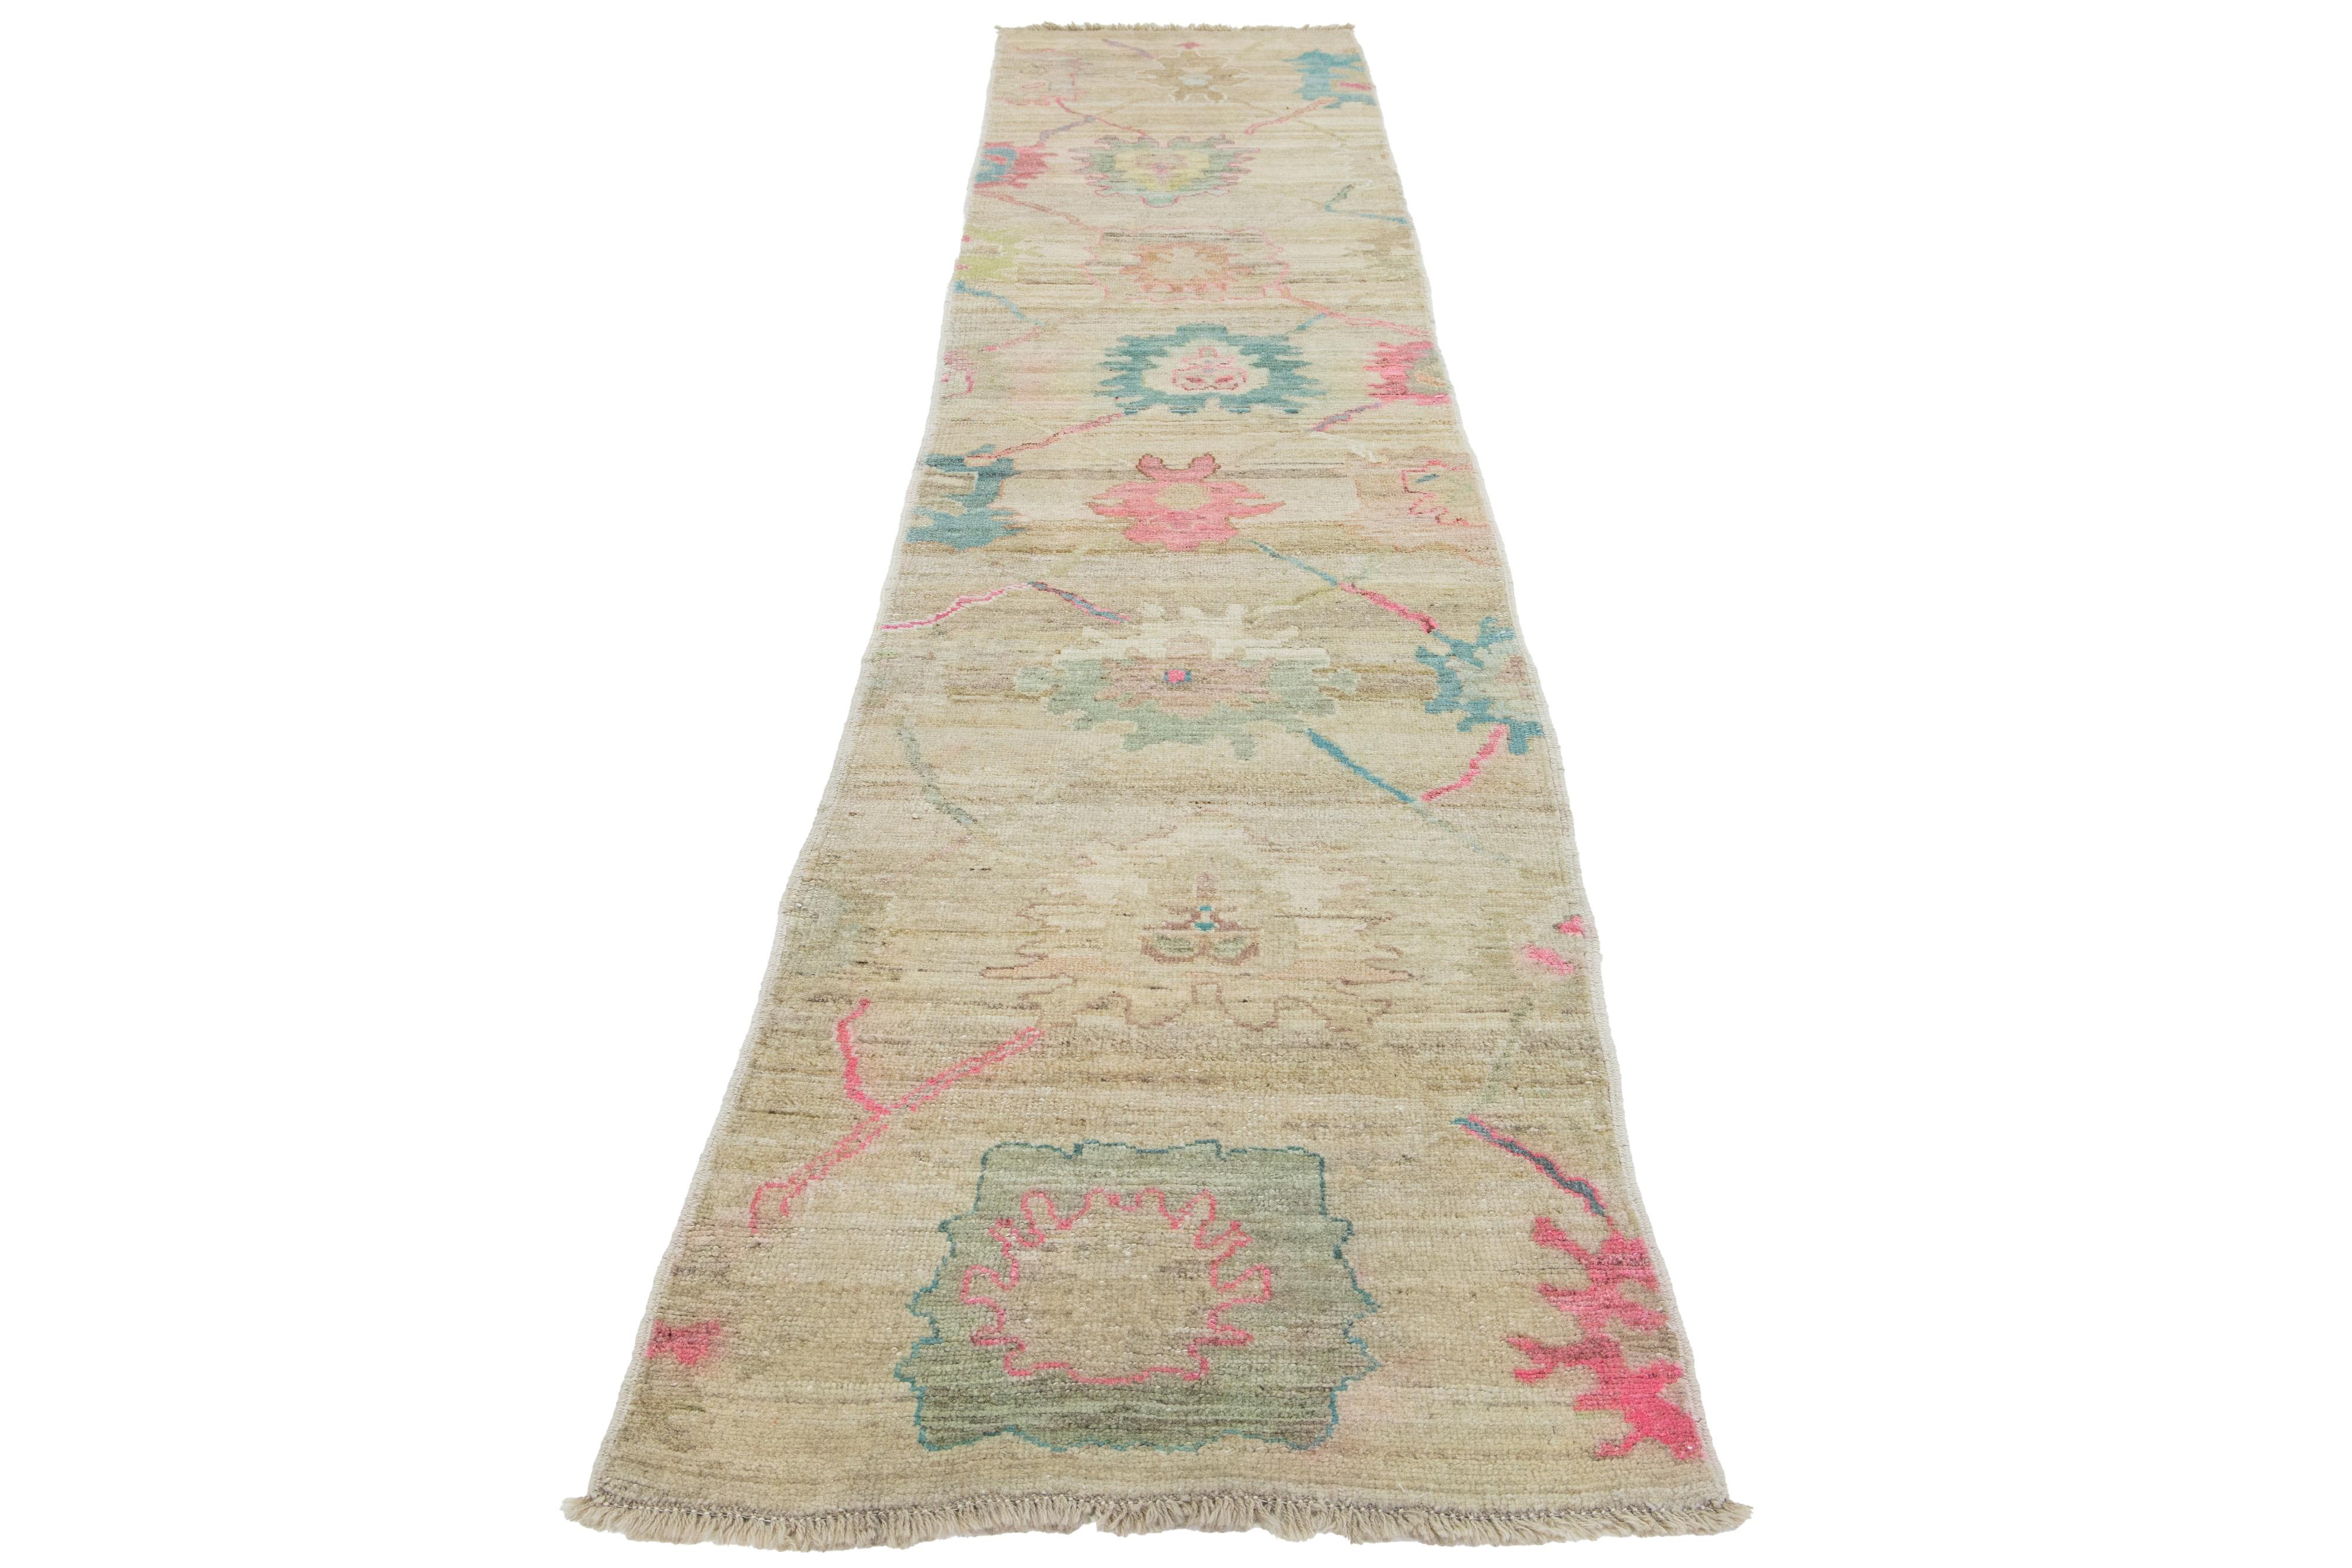 A beautiful modern Oushak hand-knotted wool rug with a beige field, this Turkish Piece has brown, blue, green, and pink accents in a gorgeous floral design.

This rug measures 2'10 x 14'8